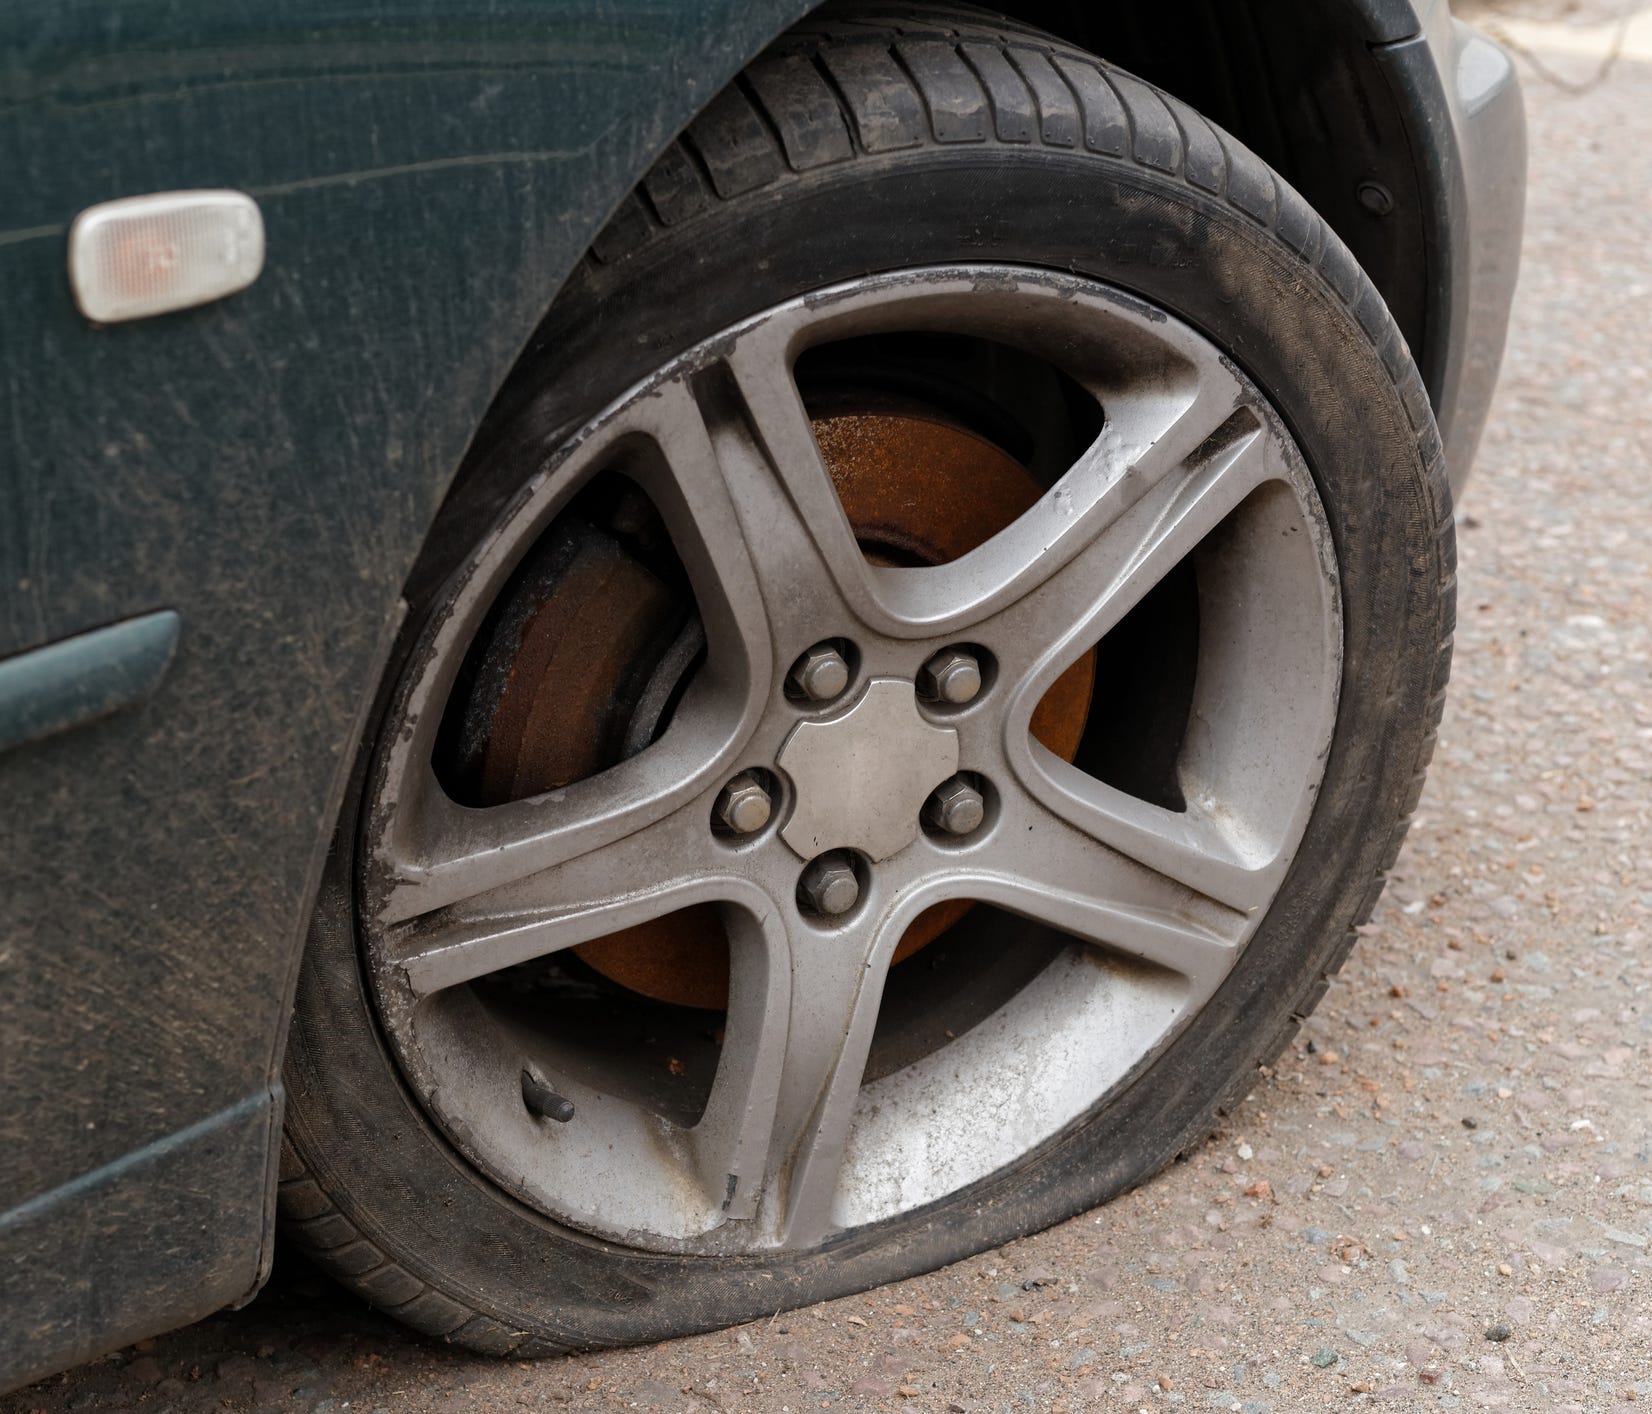 Nobody wants a flat tire. Check to make sure your spare is ready before you start driving.